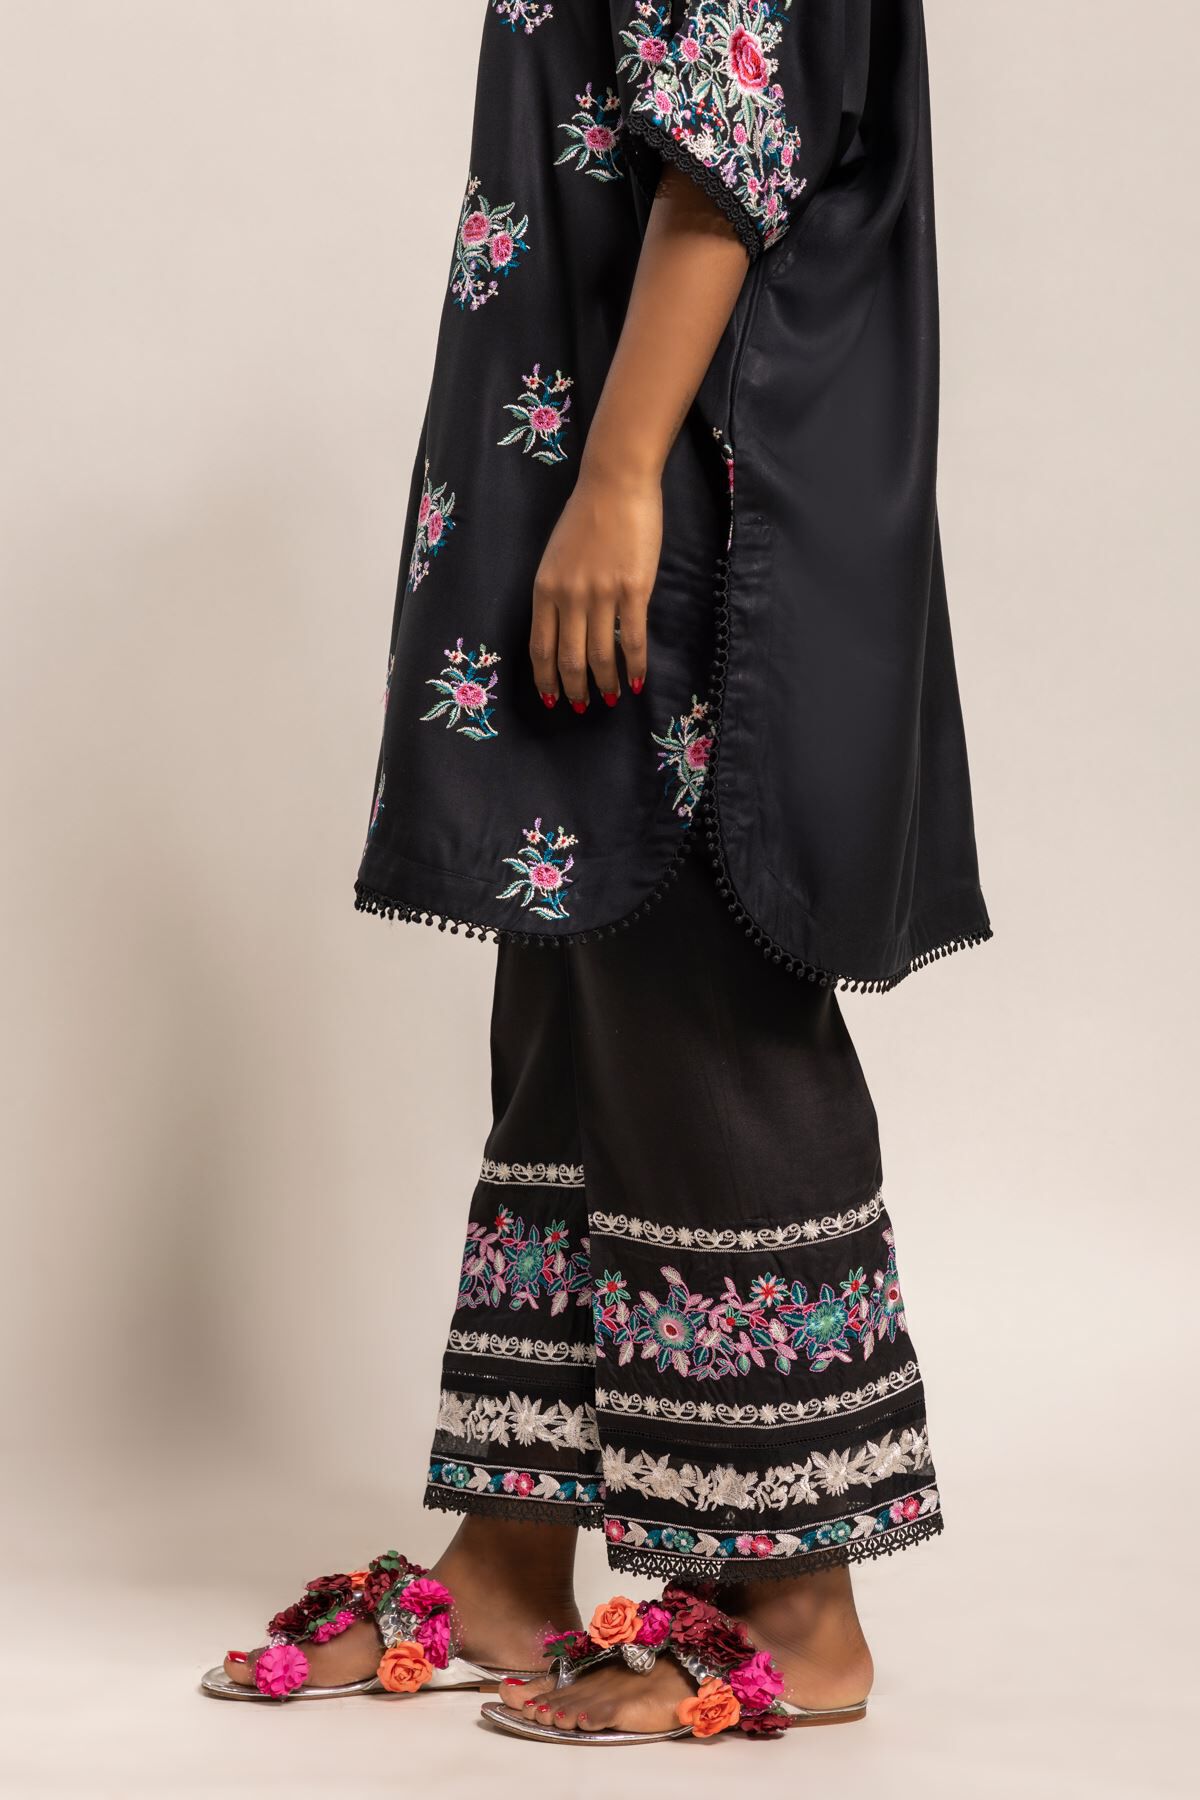 KHAADI KHAAS EMBROIDERED Trousers In Black Brand New 4000  PicClick UK